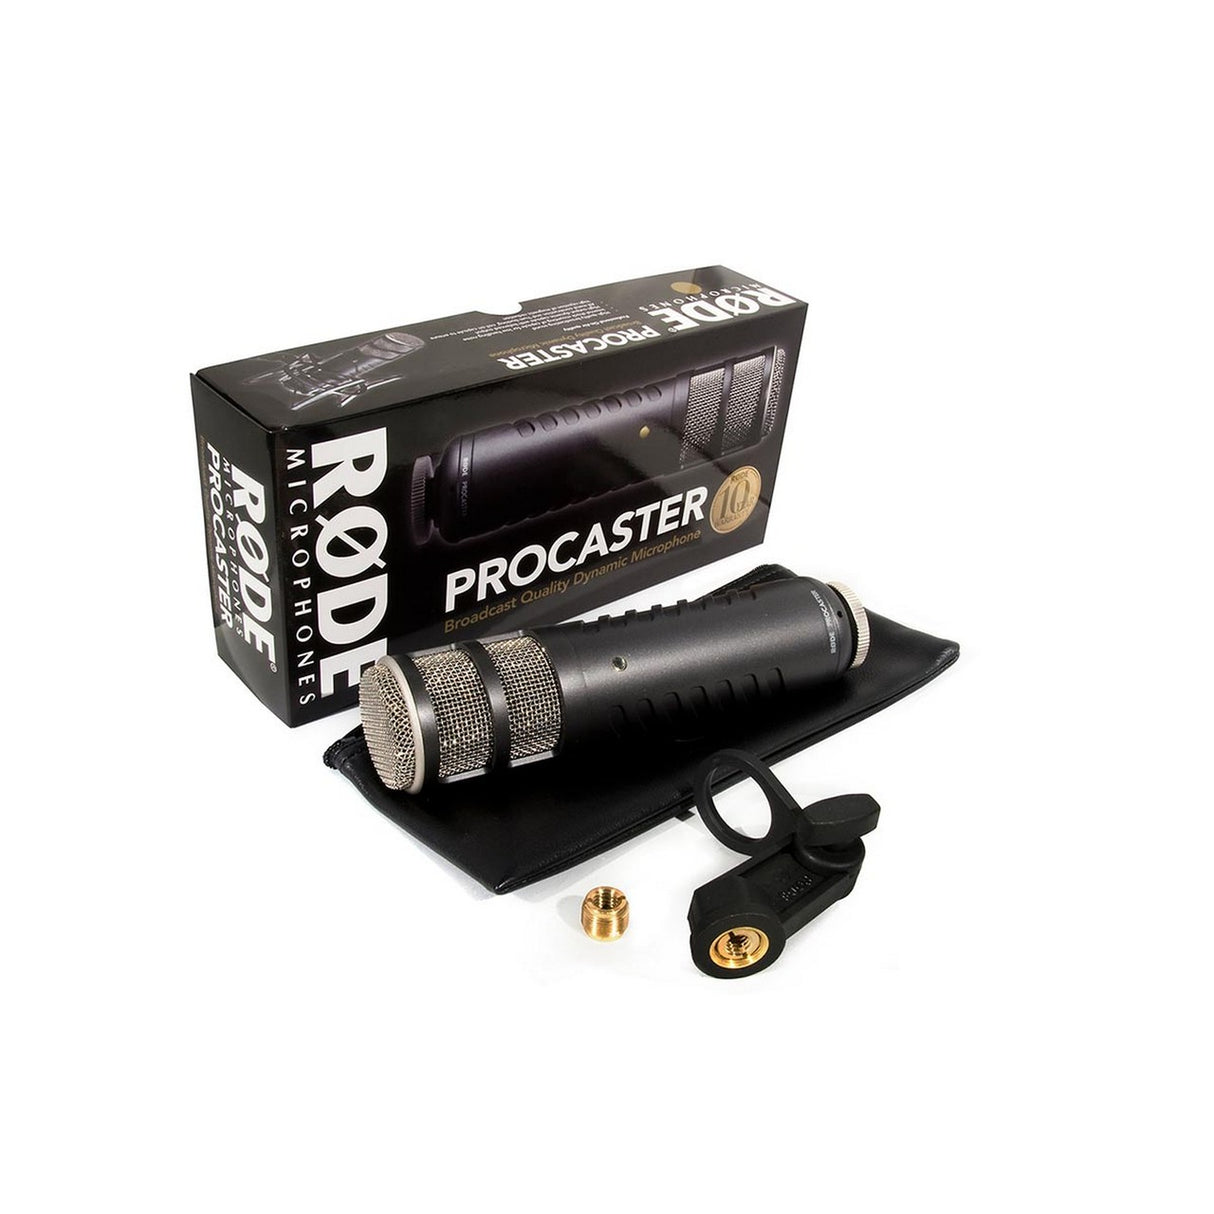 RODE Procaster Broadcast Quality Dynamic Microphone (Used)